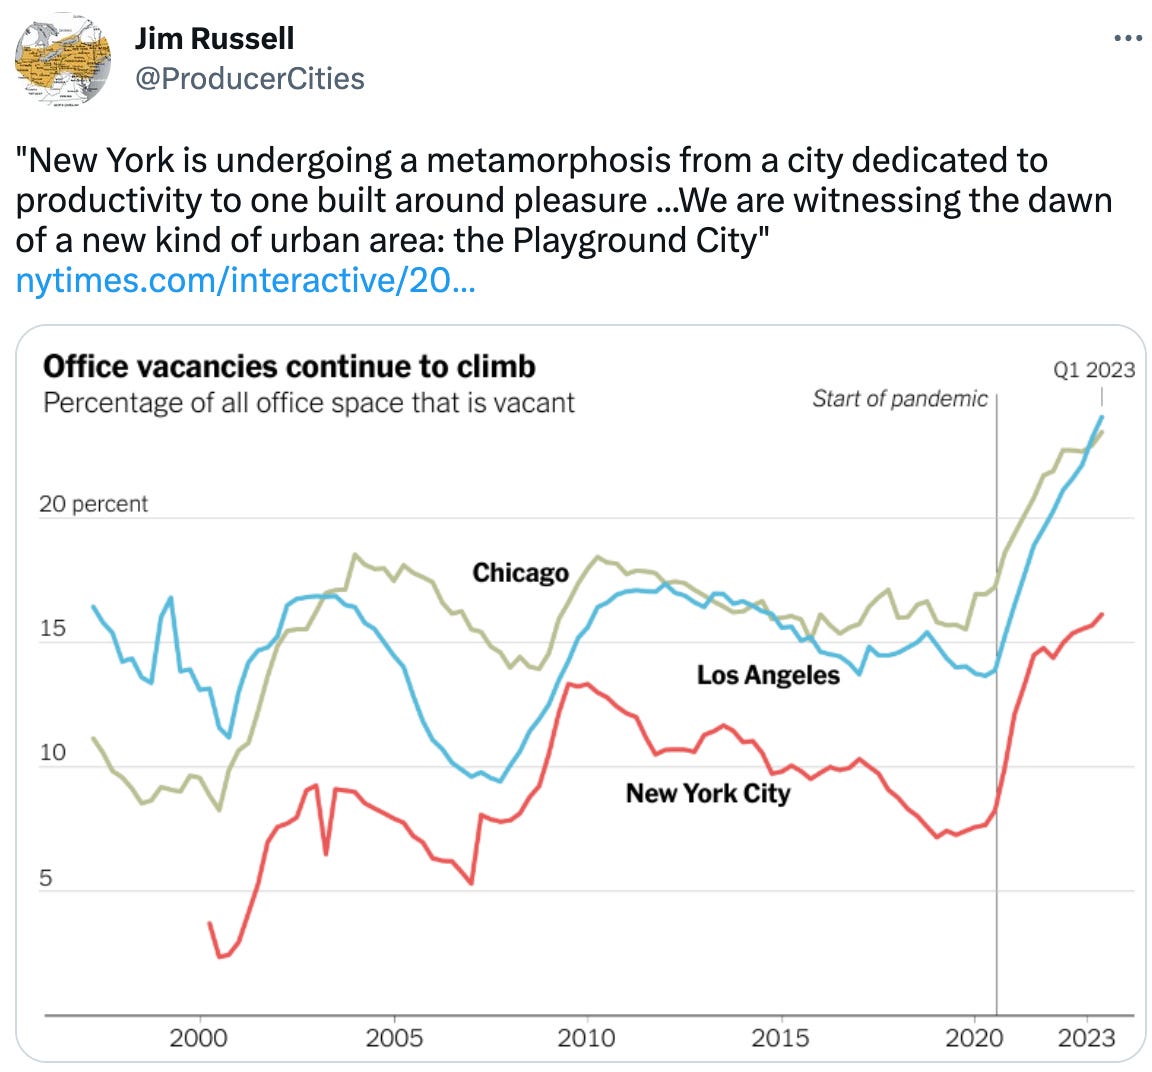  Jim Russell @ProducerCities "New York is undergoing a metamorphosis from a city dedicated to productivity to one built around pleasure ...We are witnessing the dawn of a new kind of urban area: the Playground City" https://nytimes.com/interactive/2023/05/10/opinion/nyc-office-vacancy-playground-city.html